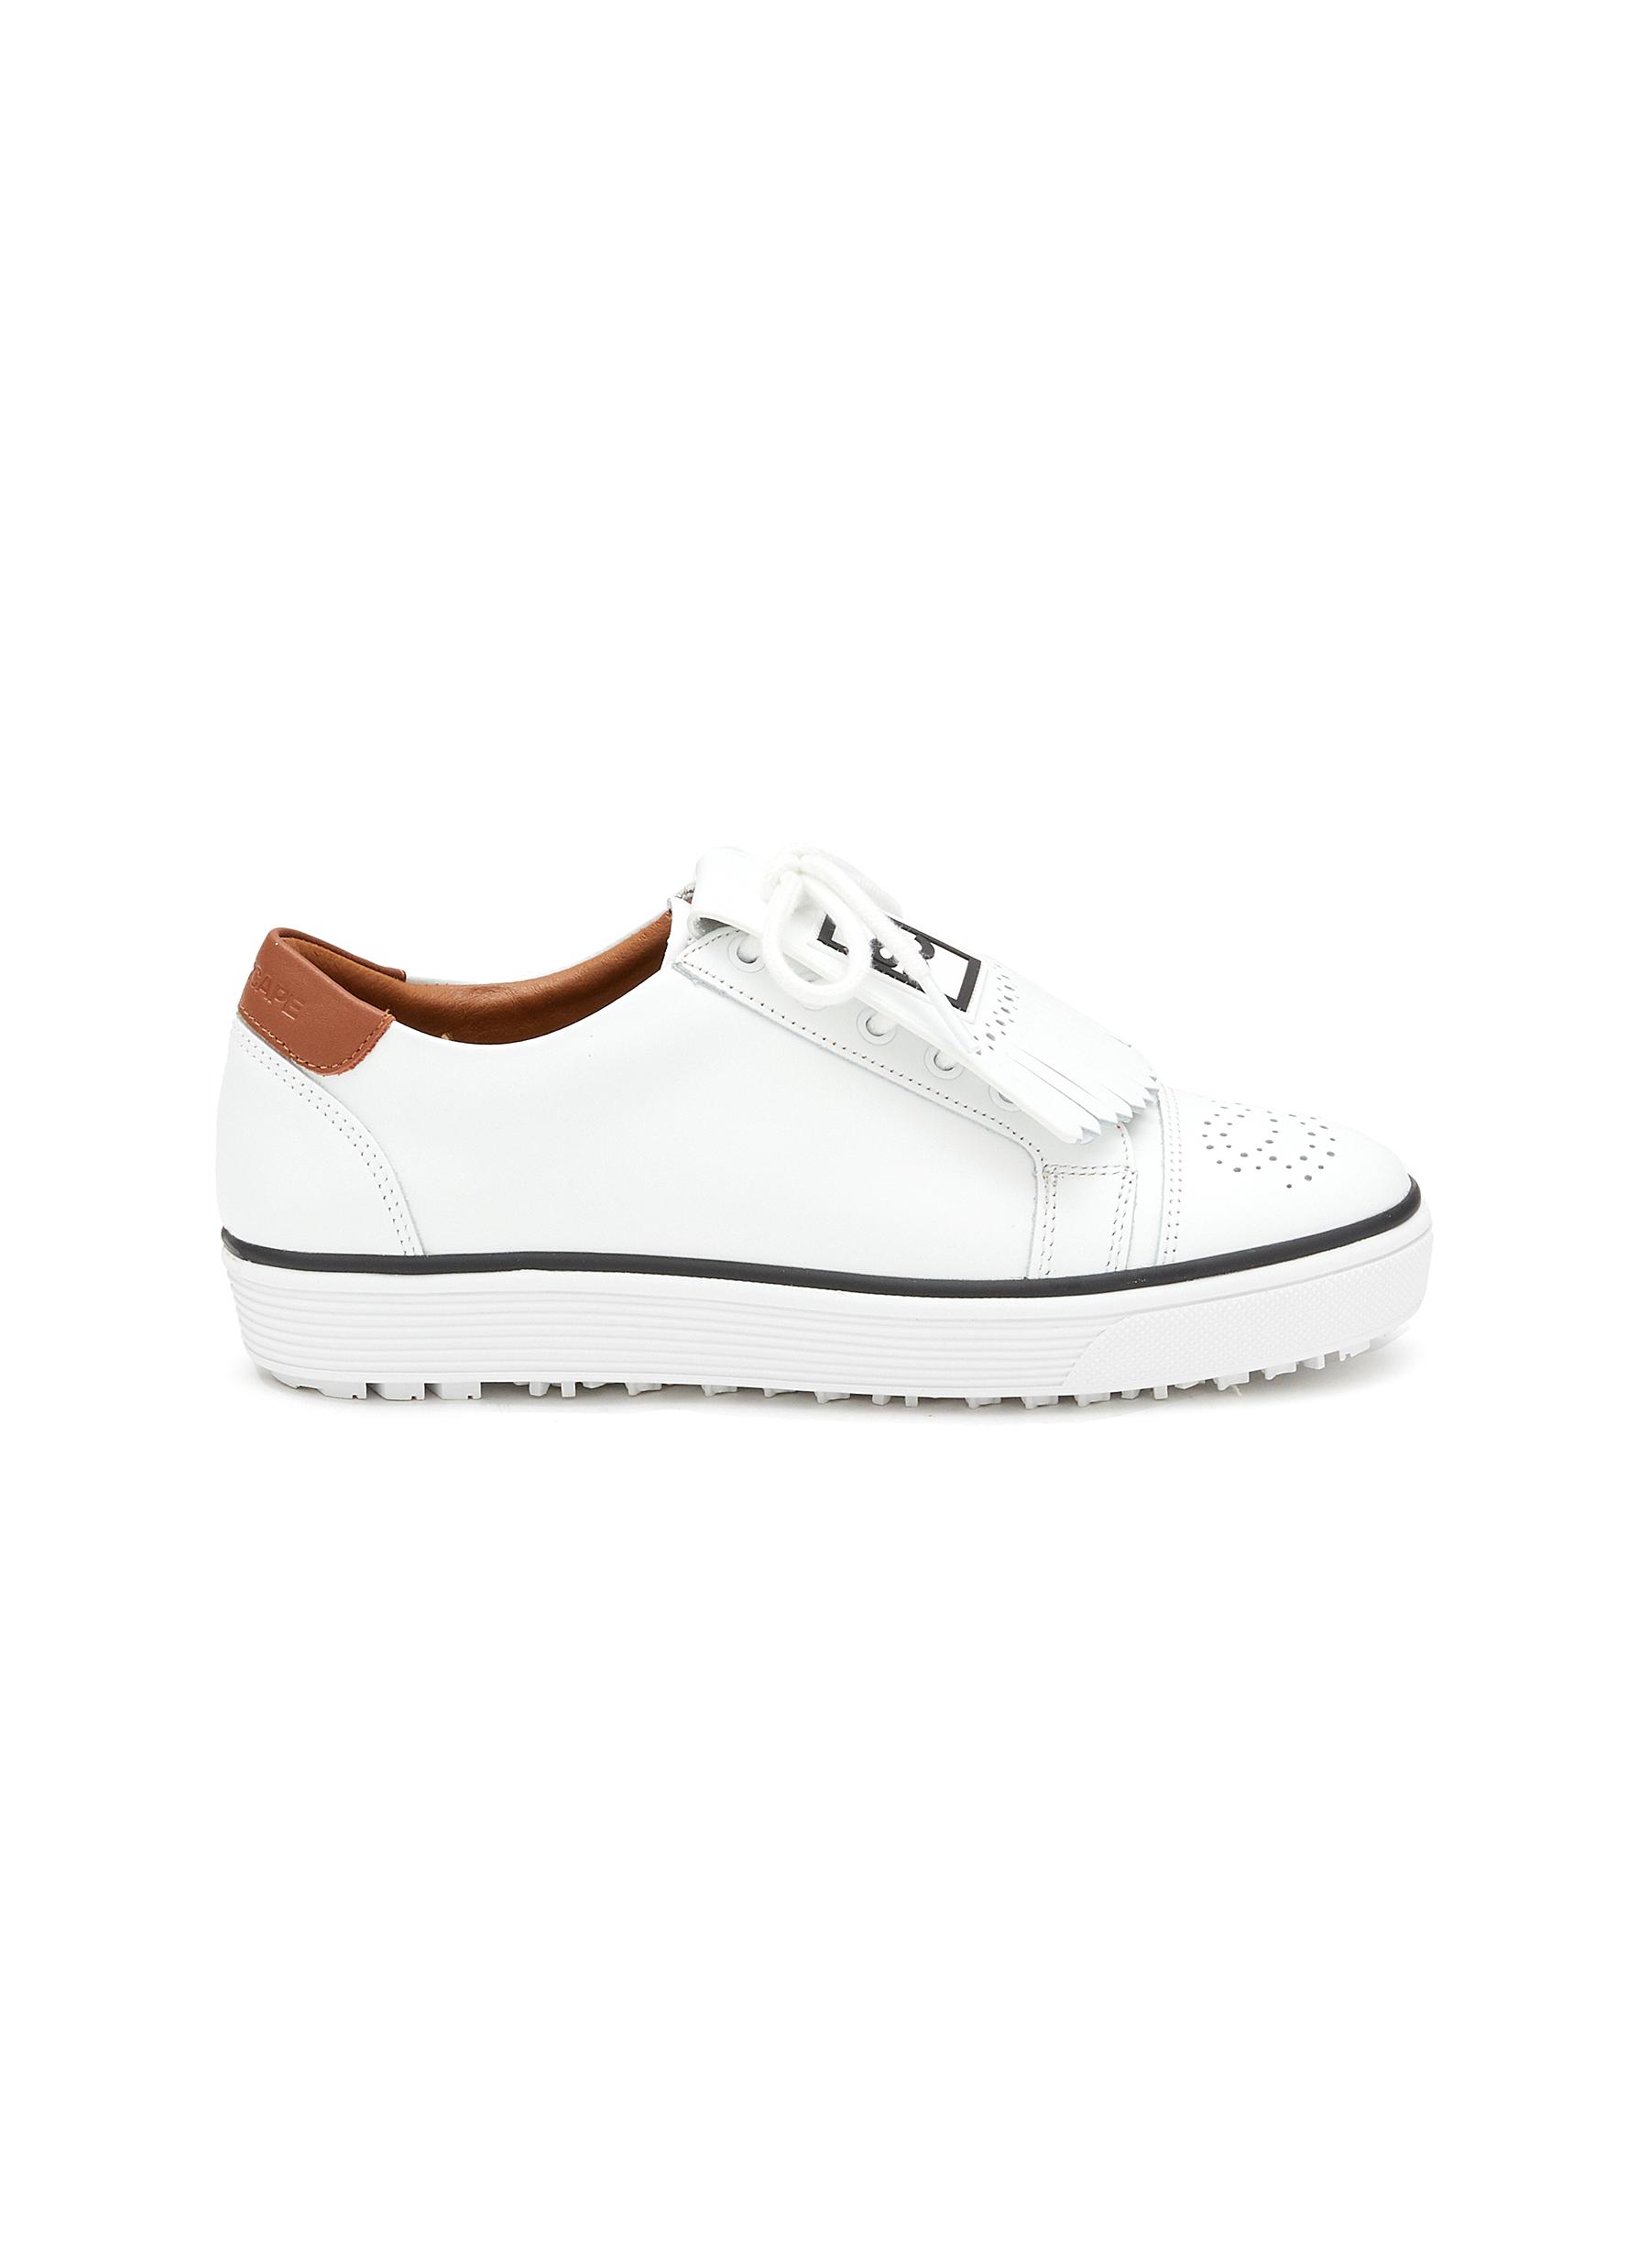 Southcape Removable Tassels Leather Sneakers In White